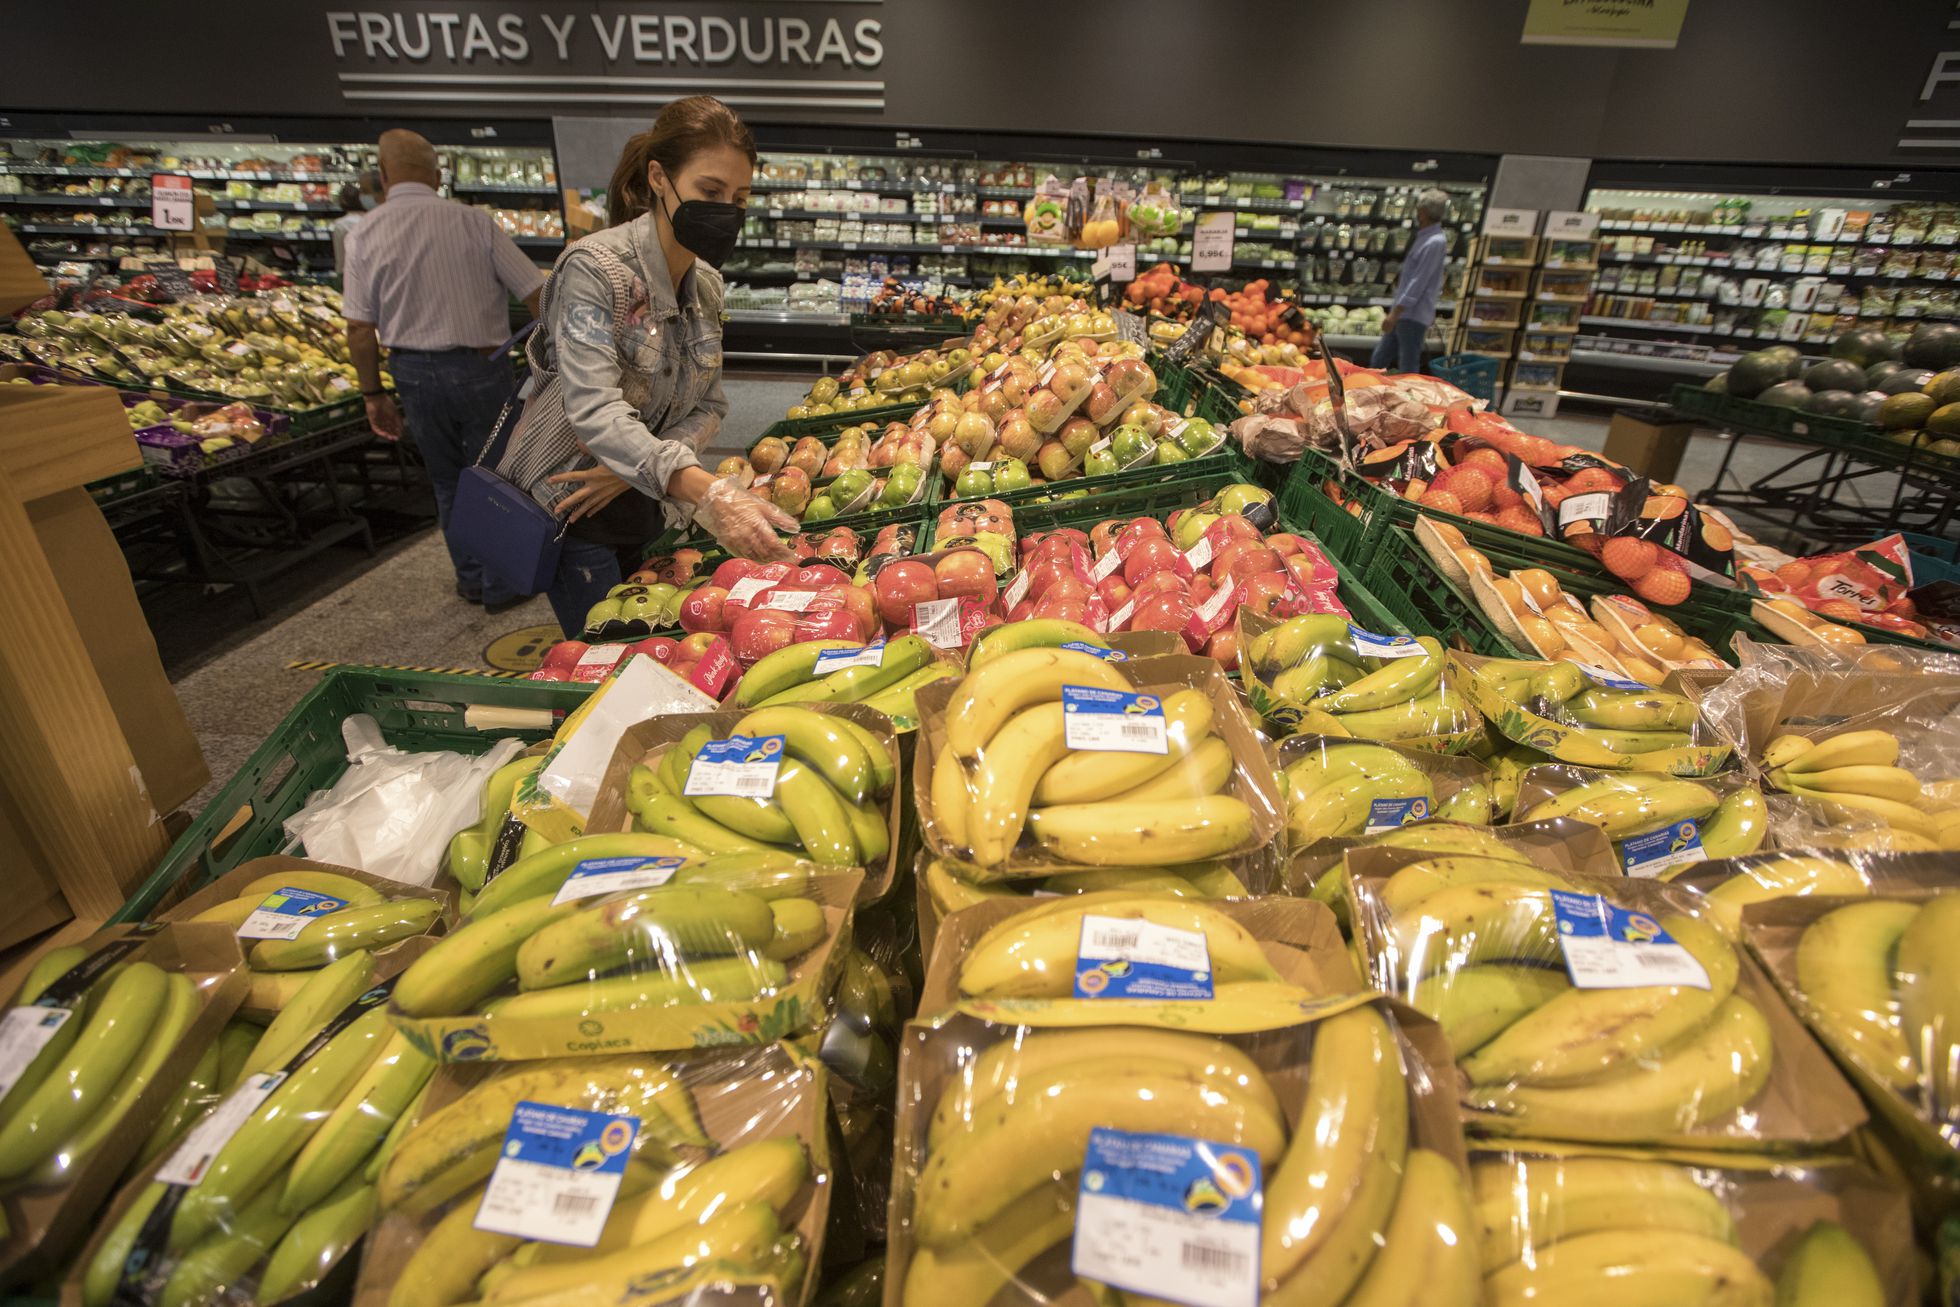 The same source said that plastic pollution “has exceeded all limits.” Environmental groups in Spain and abroad, including Greenpeace, have been campaigning for years to stop greengrocers and large supermarkets alike from wrapping fresh produce in layers of plastic.